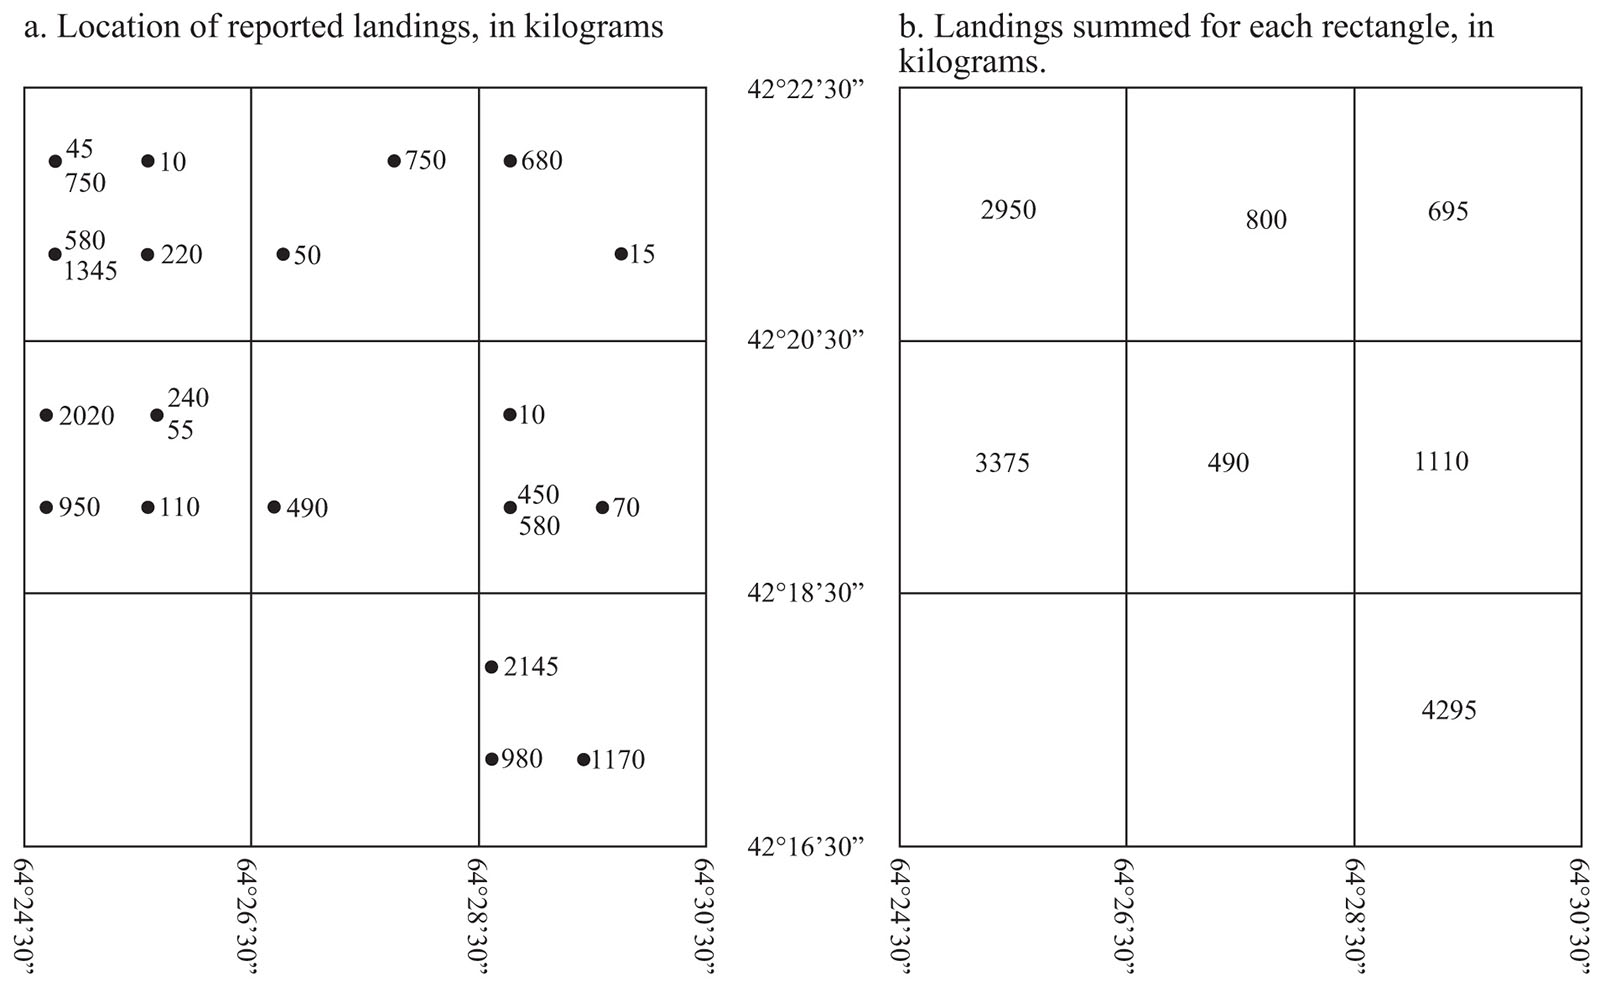 Figure 1. Aggregating the fisheries landings.